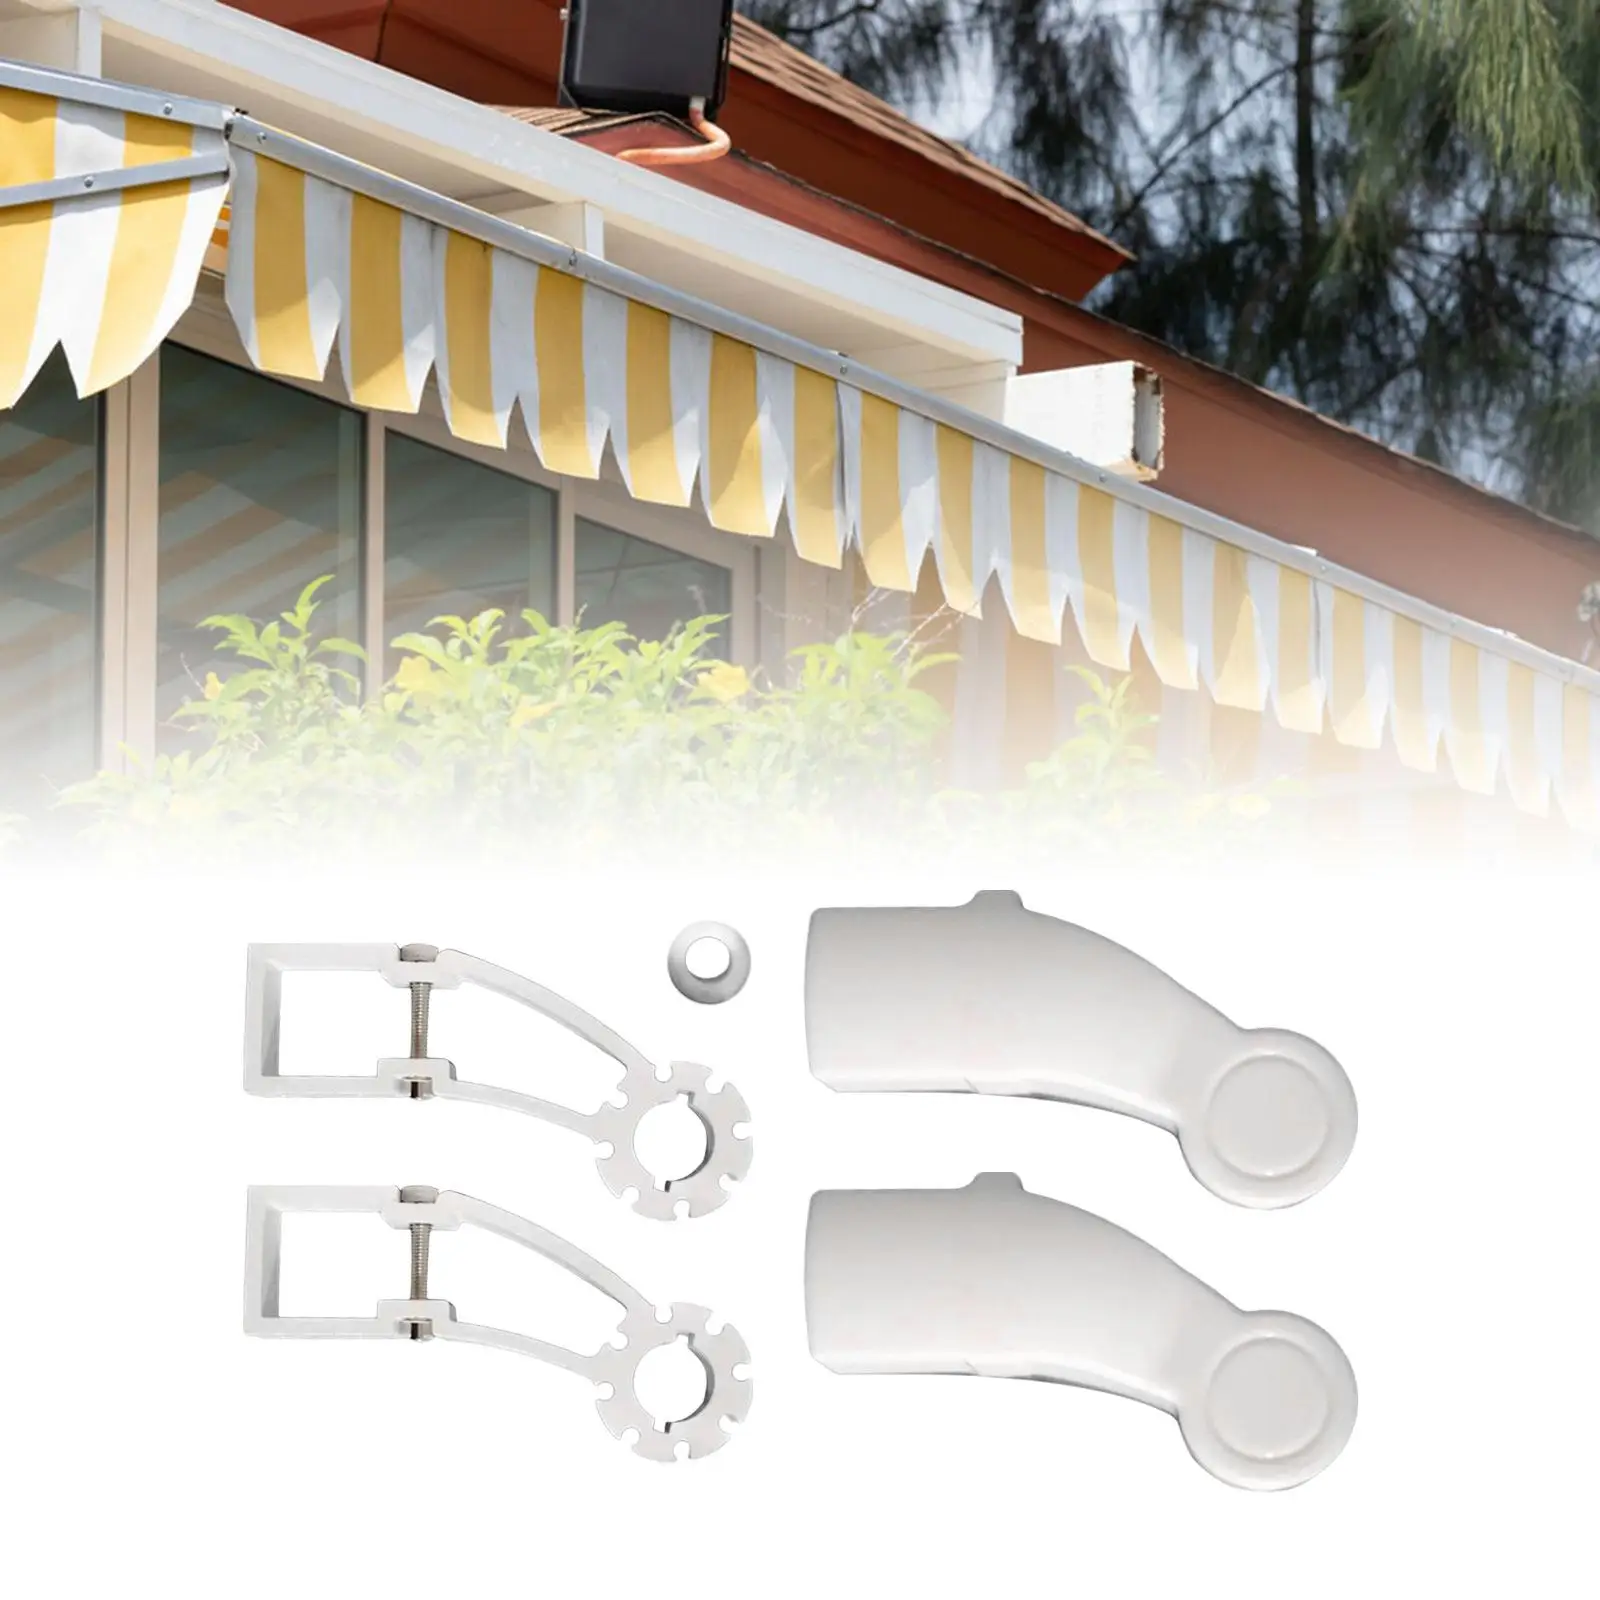 Awning Brackets 40mm Square Tube Mounting Brackets Outdoor Easy Installation Aluminum Alloy Accessories for Trailer Camper RV